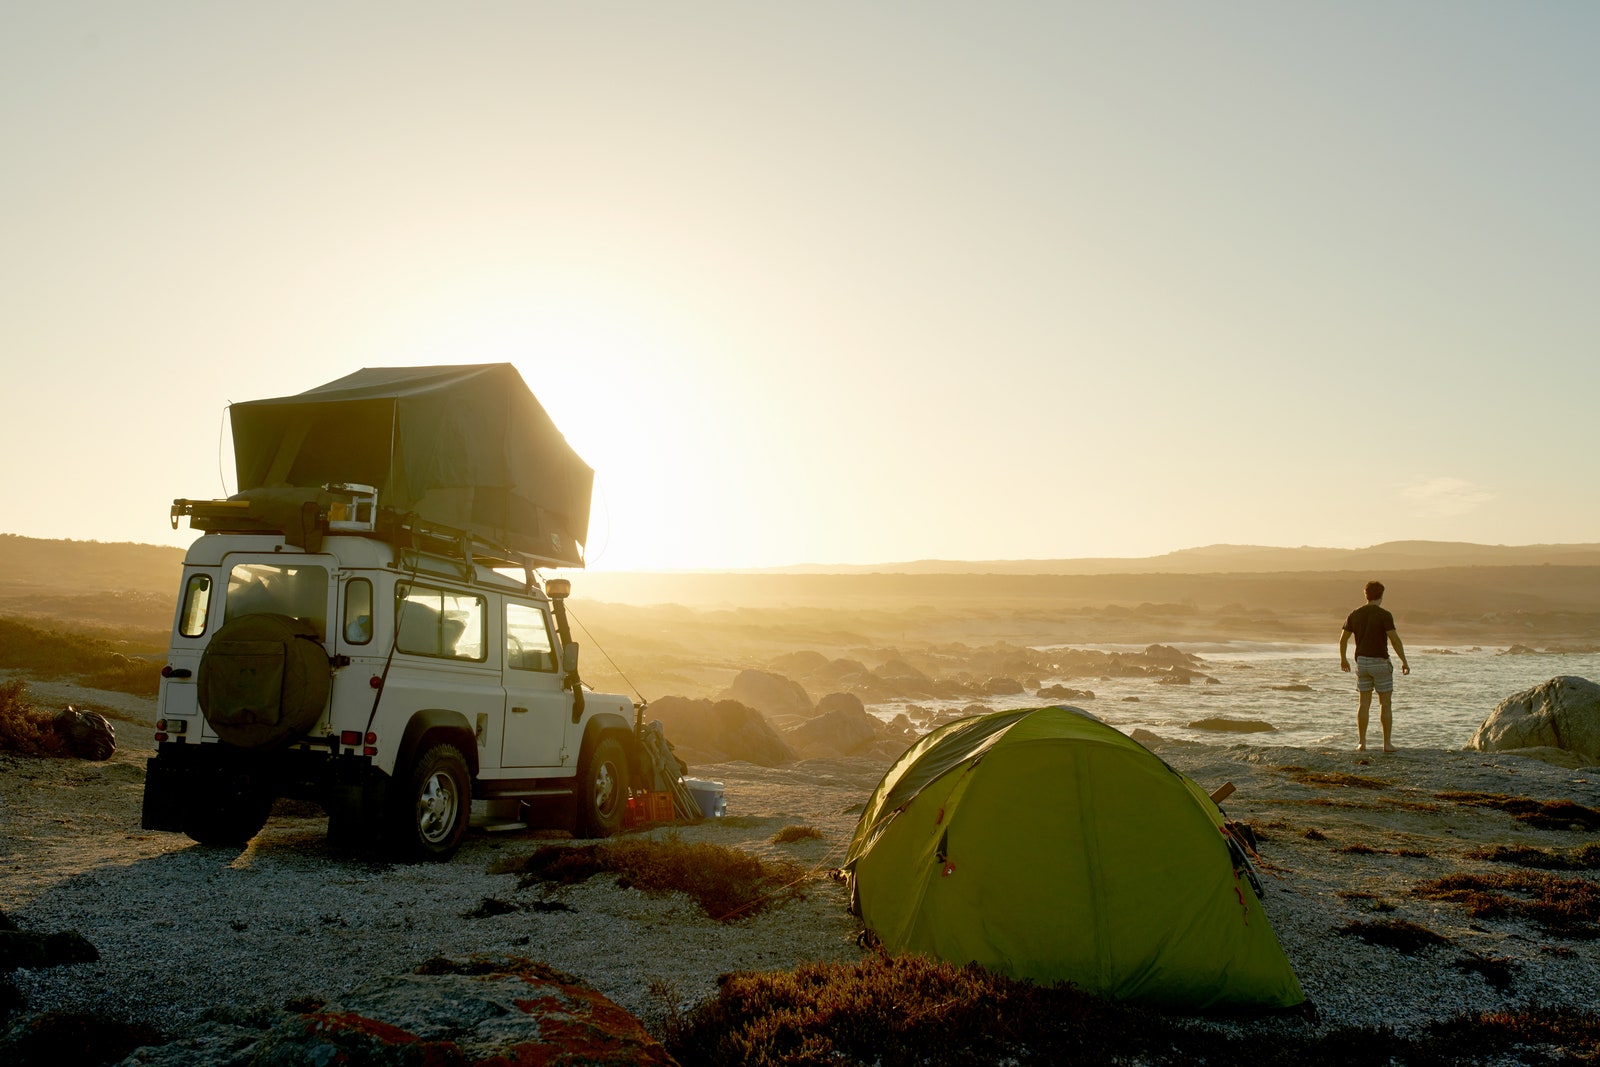 Car Camping Essentials: Where to Stay, What to Pack, and How to Organize Your Gear